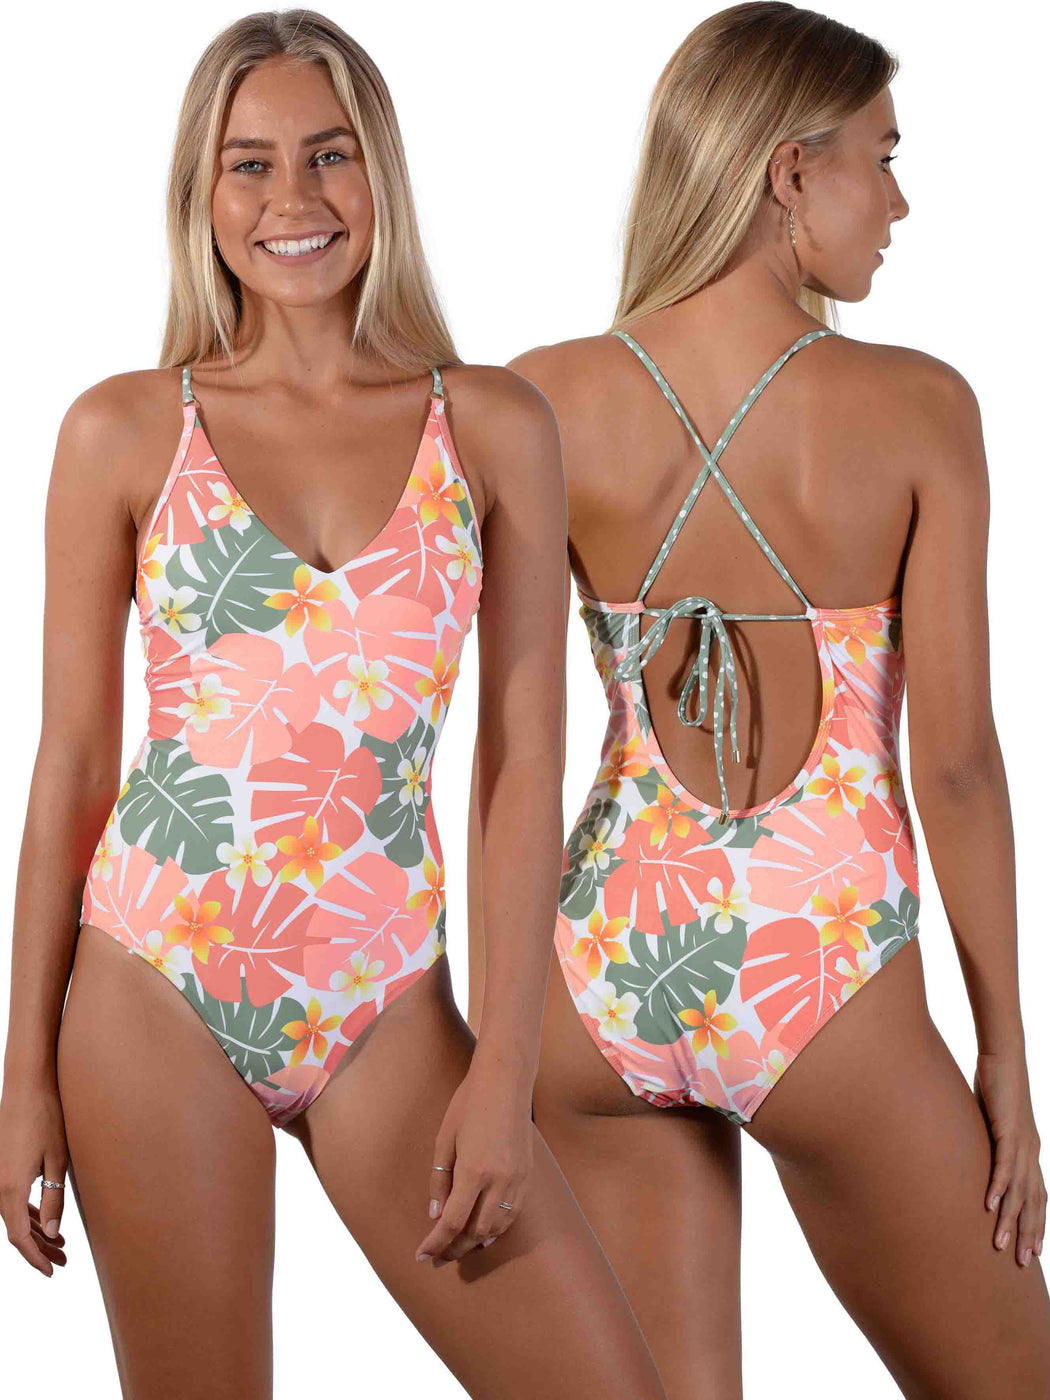 Jungle Jive Plunge Onepiece front and back together